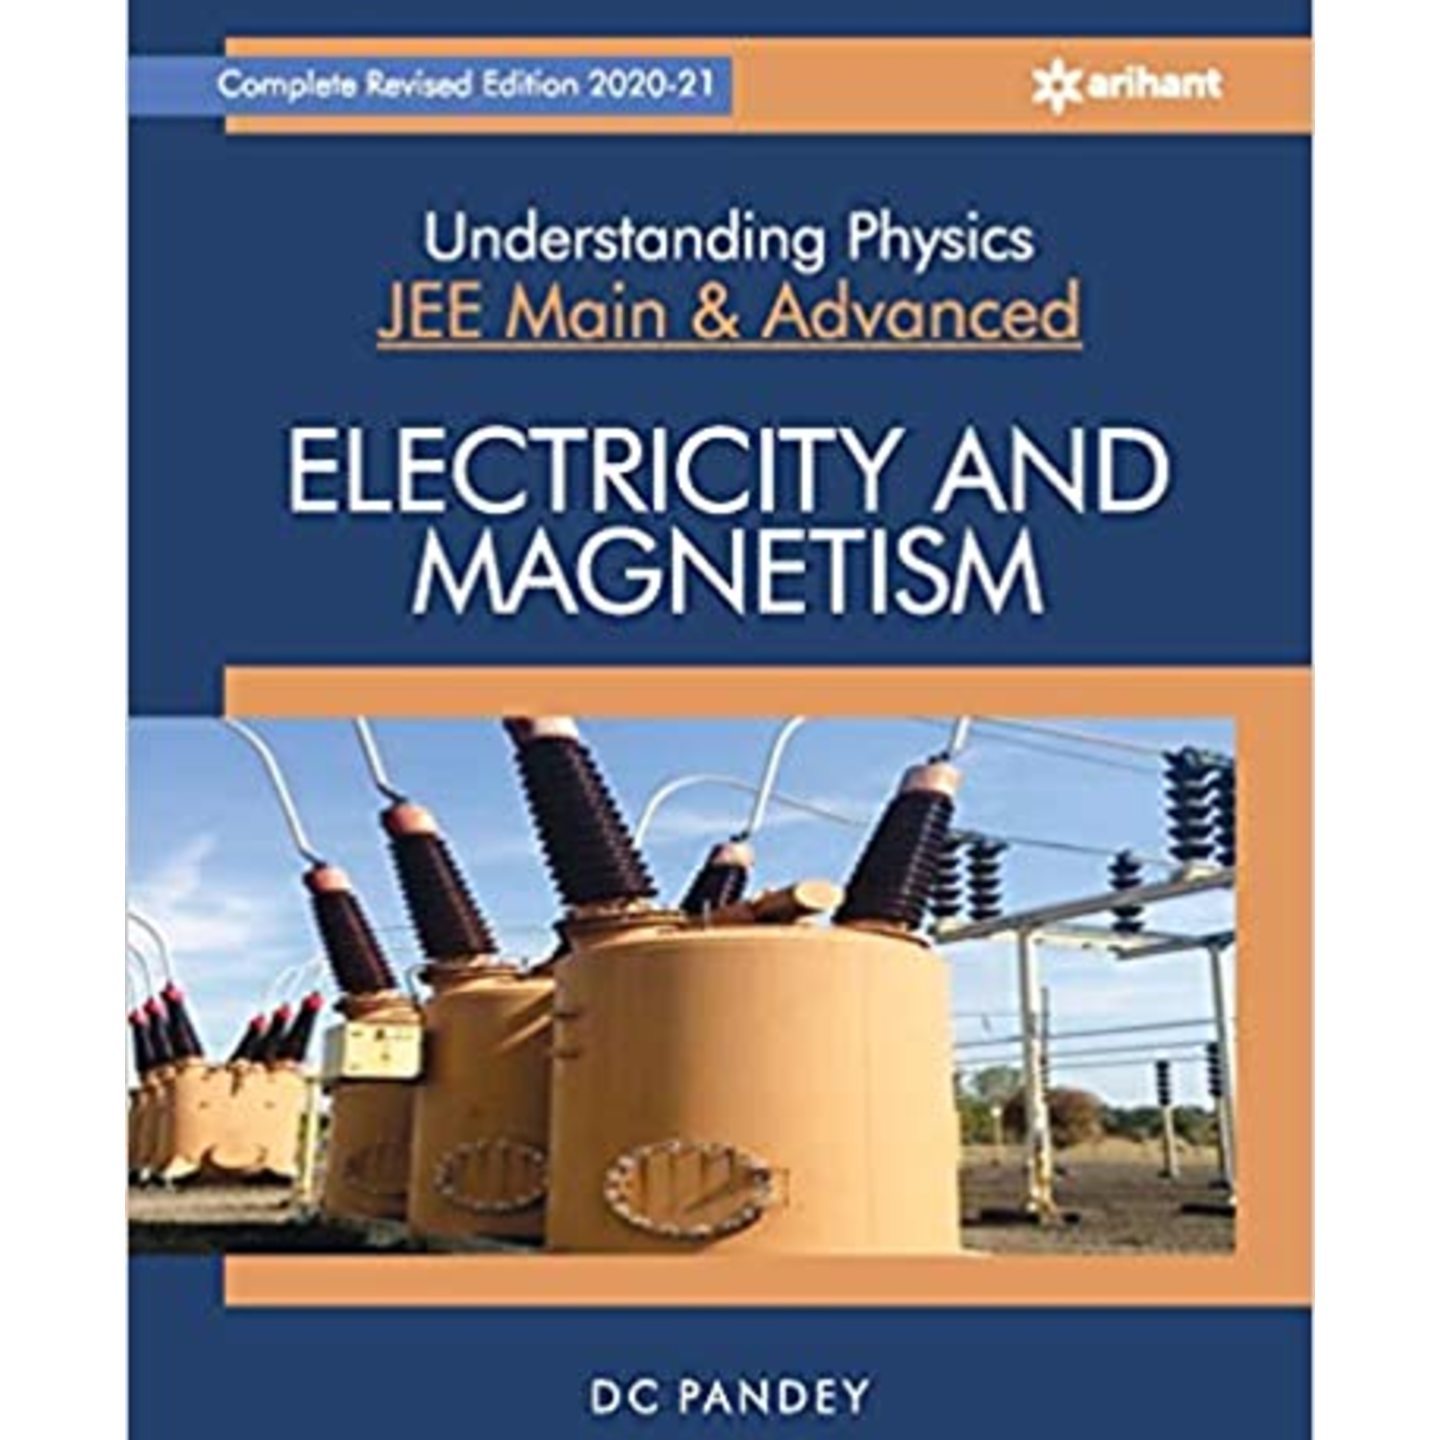 Understanding Physics for JEE Main and Advanced Electricity and Magnetism